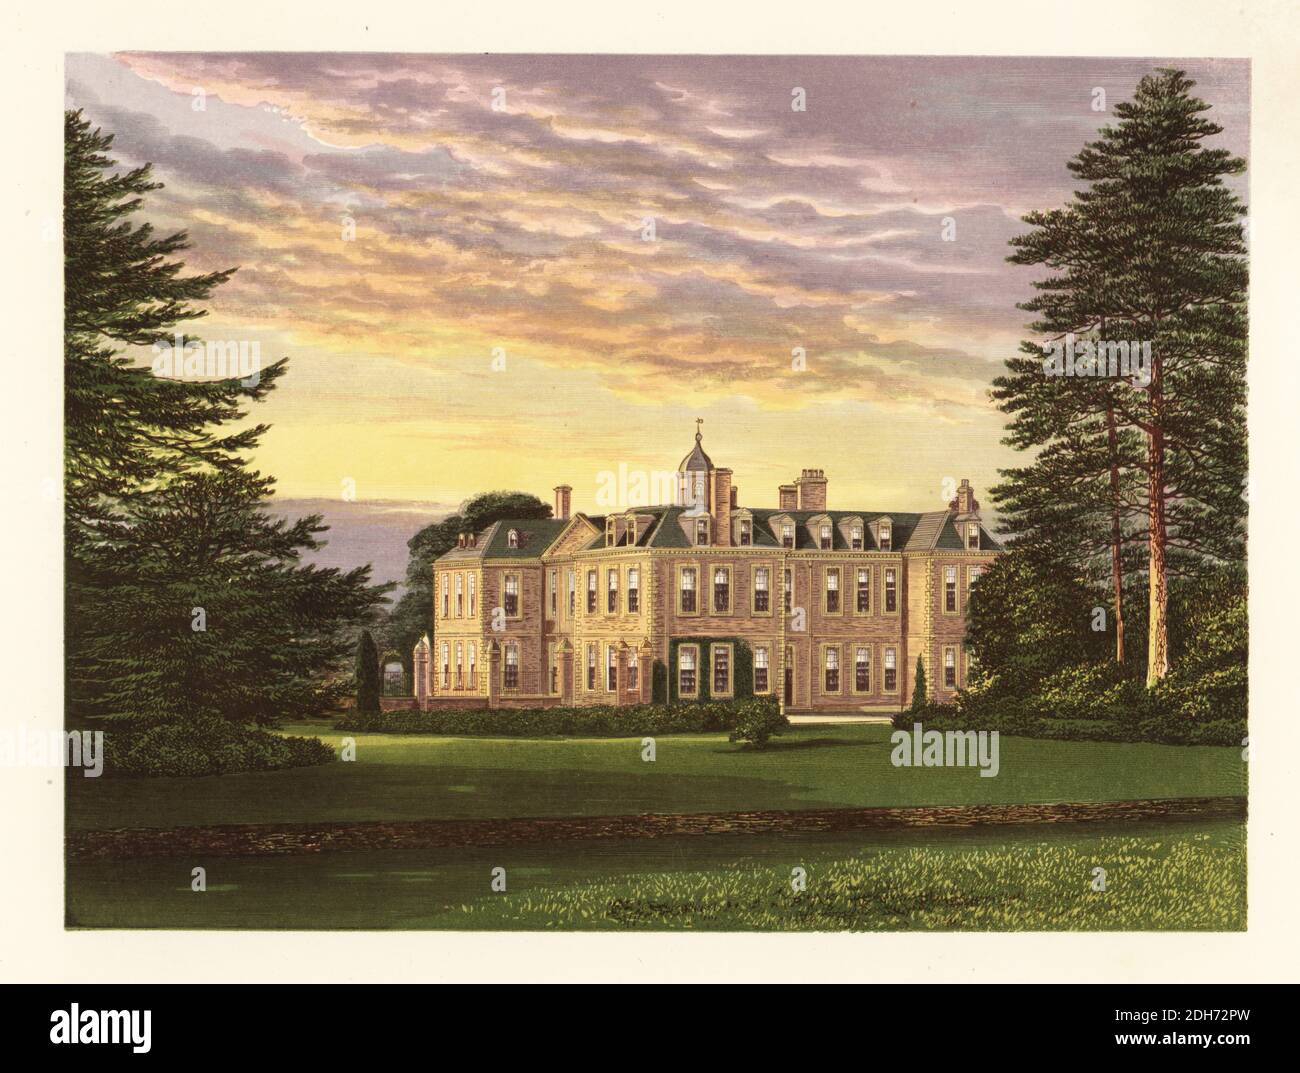 Hanbury Hall, Worcestershire, England. 18th century red-brick house in the Queen Anne Style. Home of Harry Foley Vernon, 1st Baronet of Hanbury Hall. Colour woodblock by Benjamin Fawcett in the Baxter process of an illustration by Alexander Francis Lydon from Reverend Francis Orpen Morris’s A Series of Picturesque Views of the Seats of Noblemen and Gentlemen of Great Britain and Ireland, William Mackenzie, London, 1880. Stock Photo